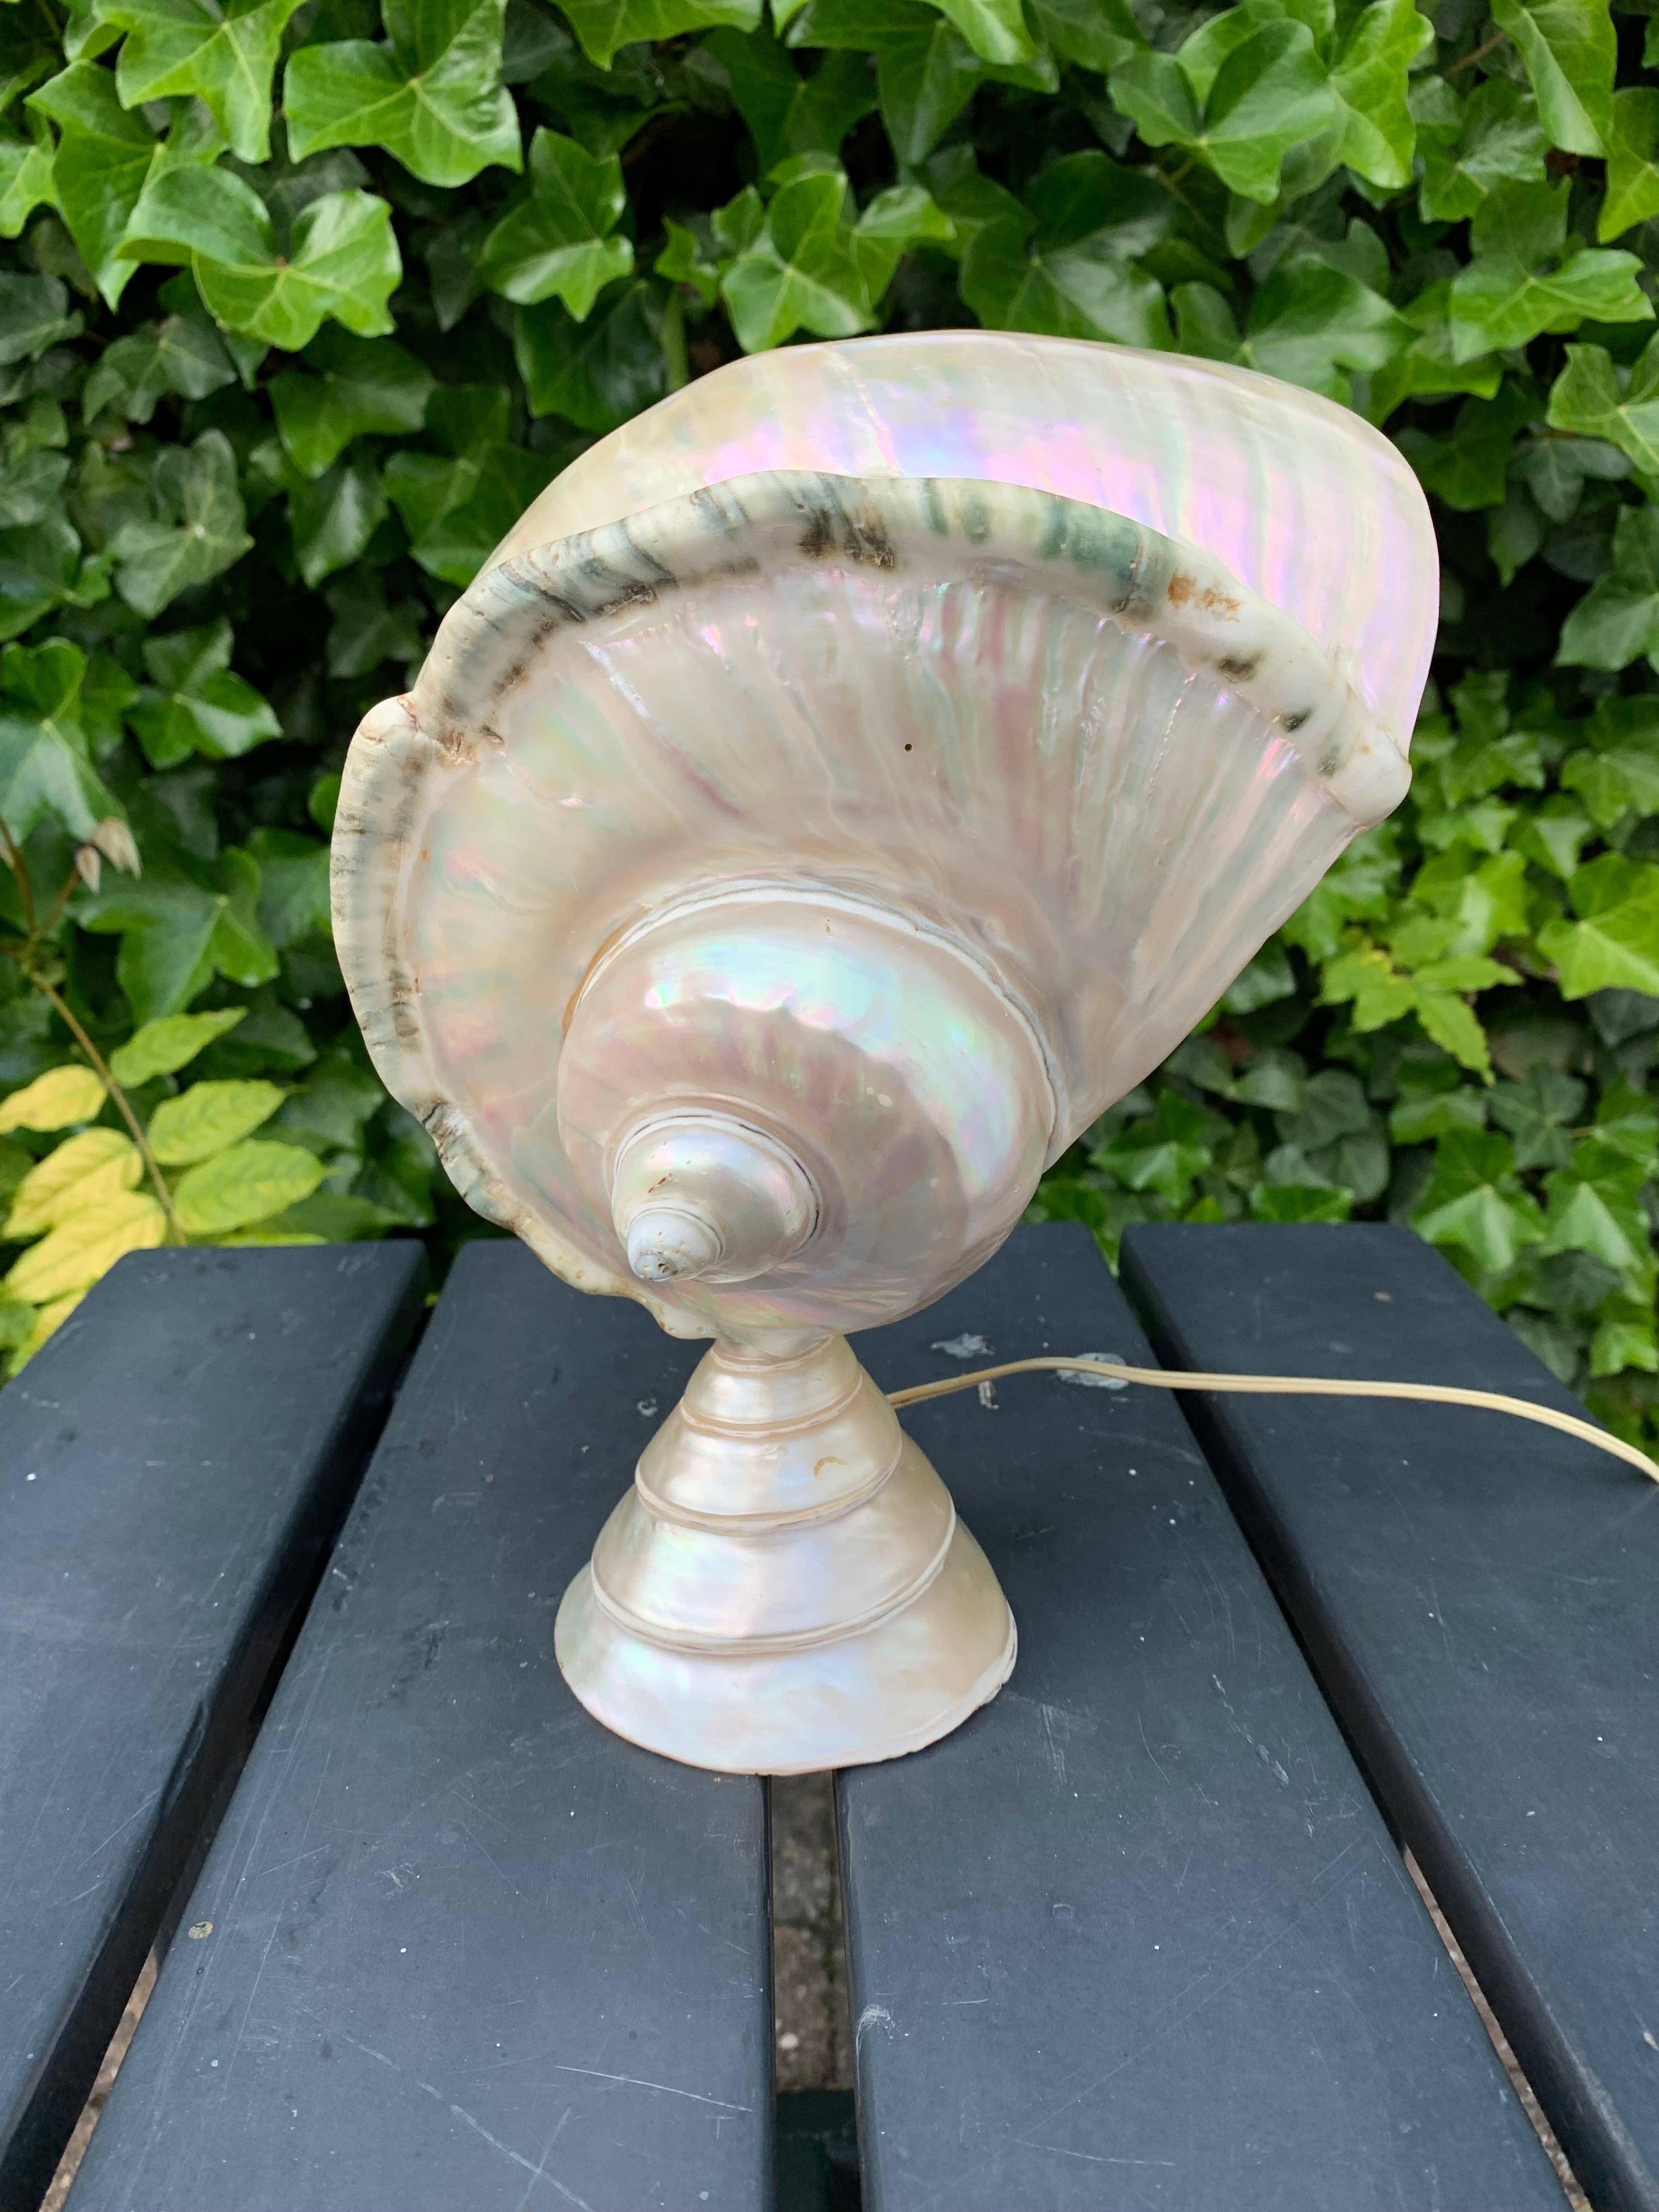 Artistic and beautifully handcrafted table lamp.

If you are a sea life or sea diving enthousiast or if you are an interior designer decorating a home or business with a maritime theme then this marvellous table lamp could be ideal. The perfect